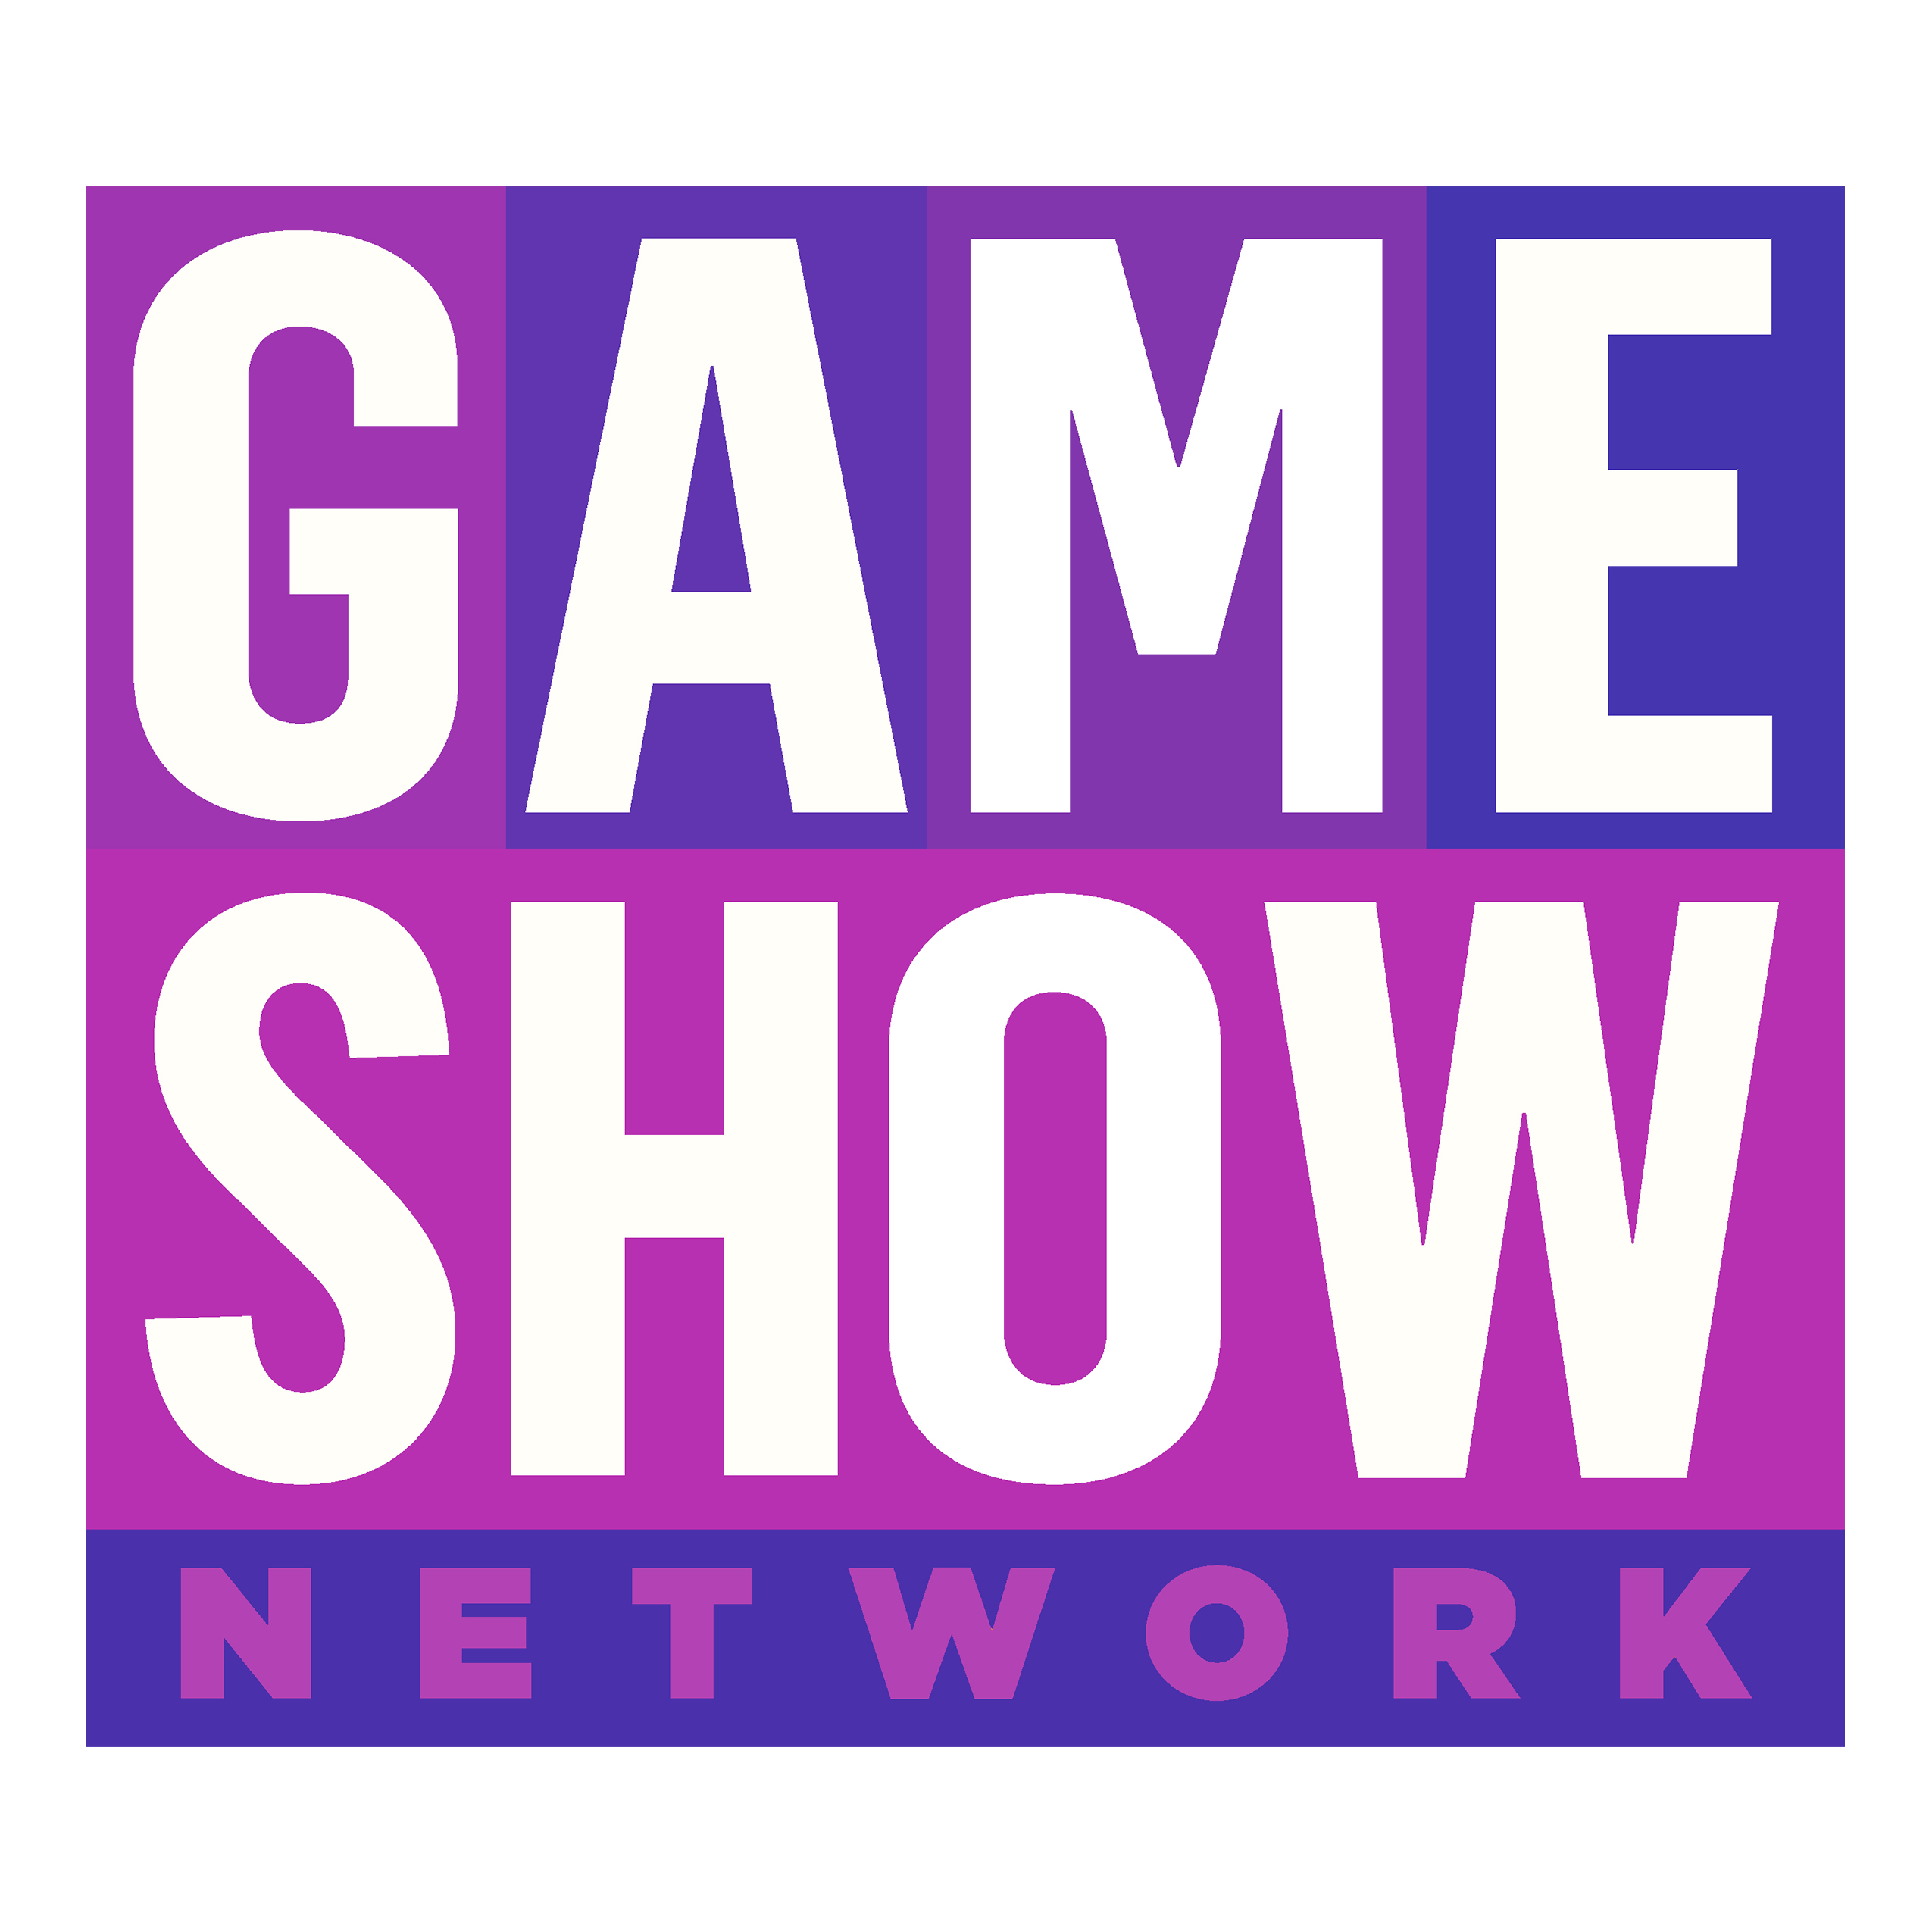 game show network